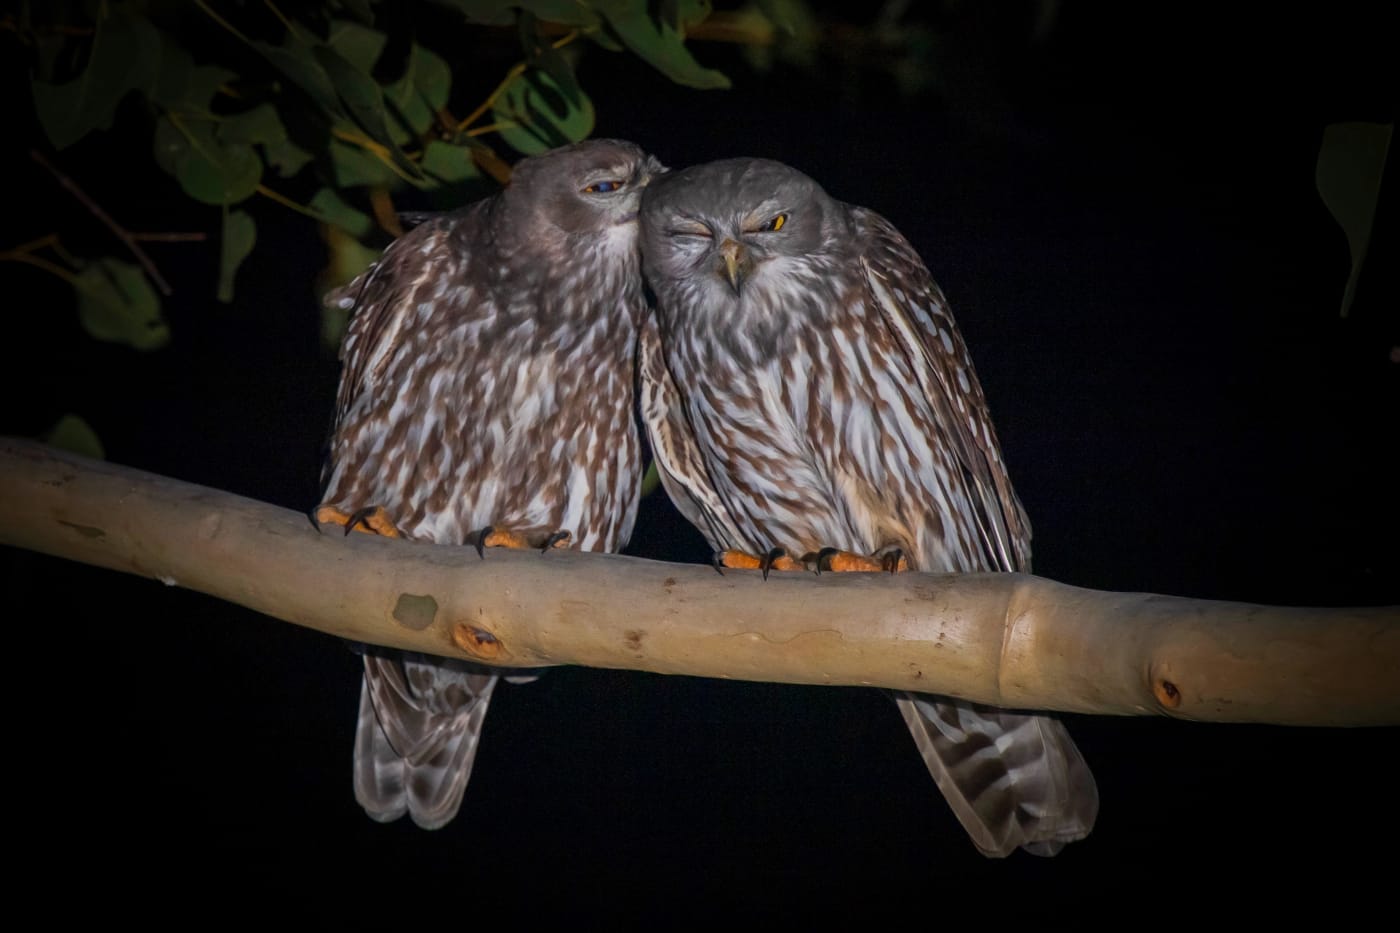 A breeding pair of Barking Owls= watching over their nest from a tree branch.